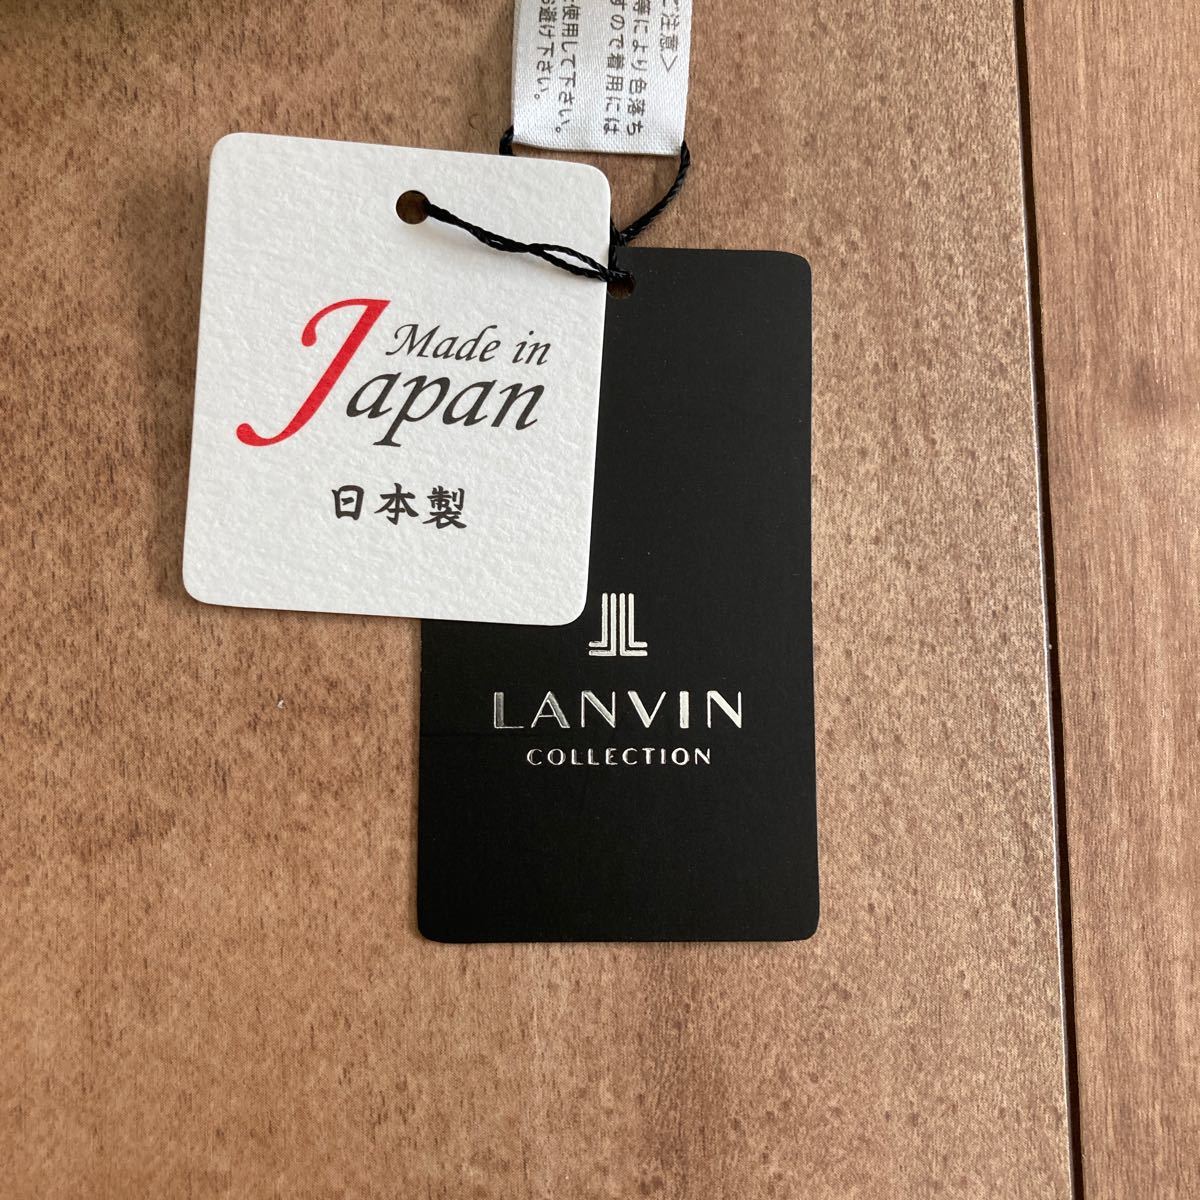  Lanvin collection LANVIN collection silk scarf unused goods 